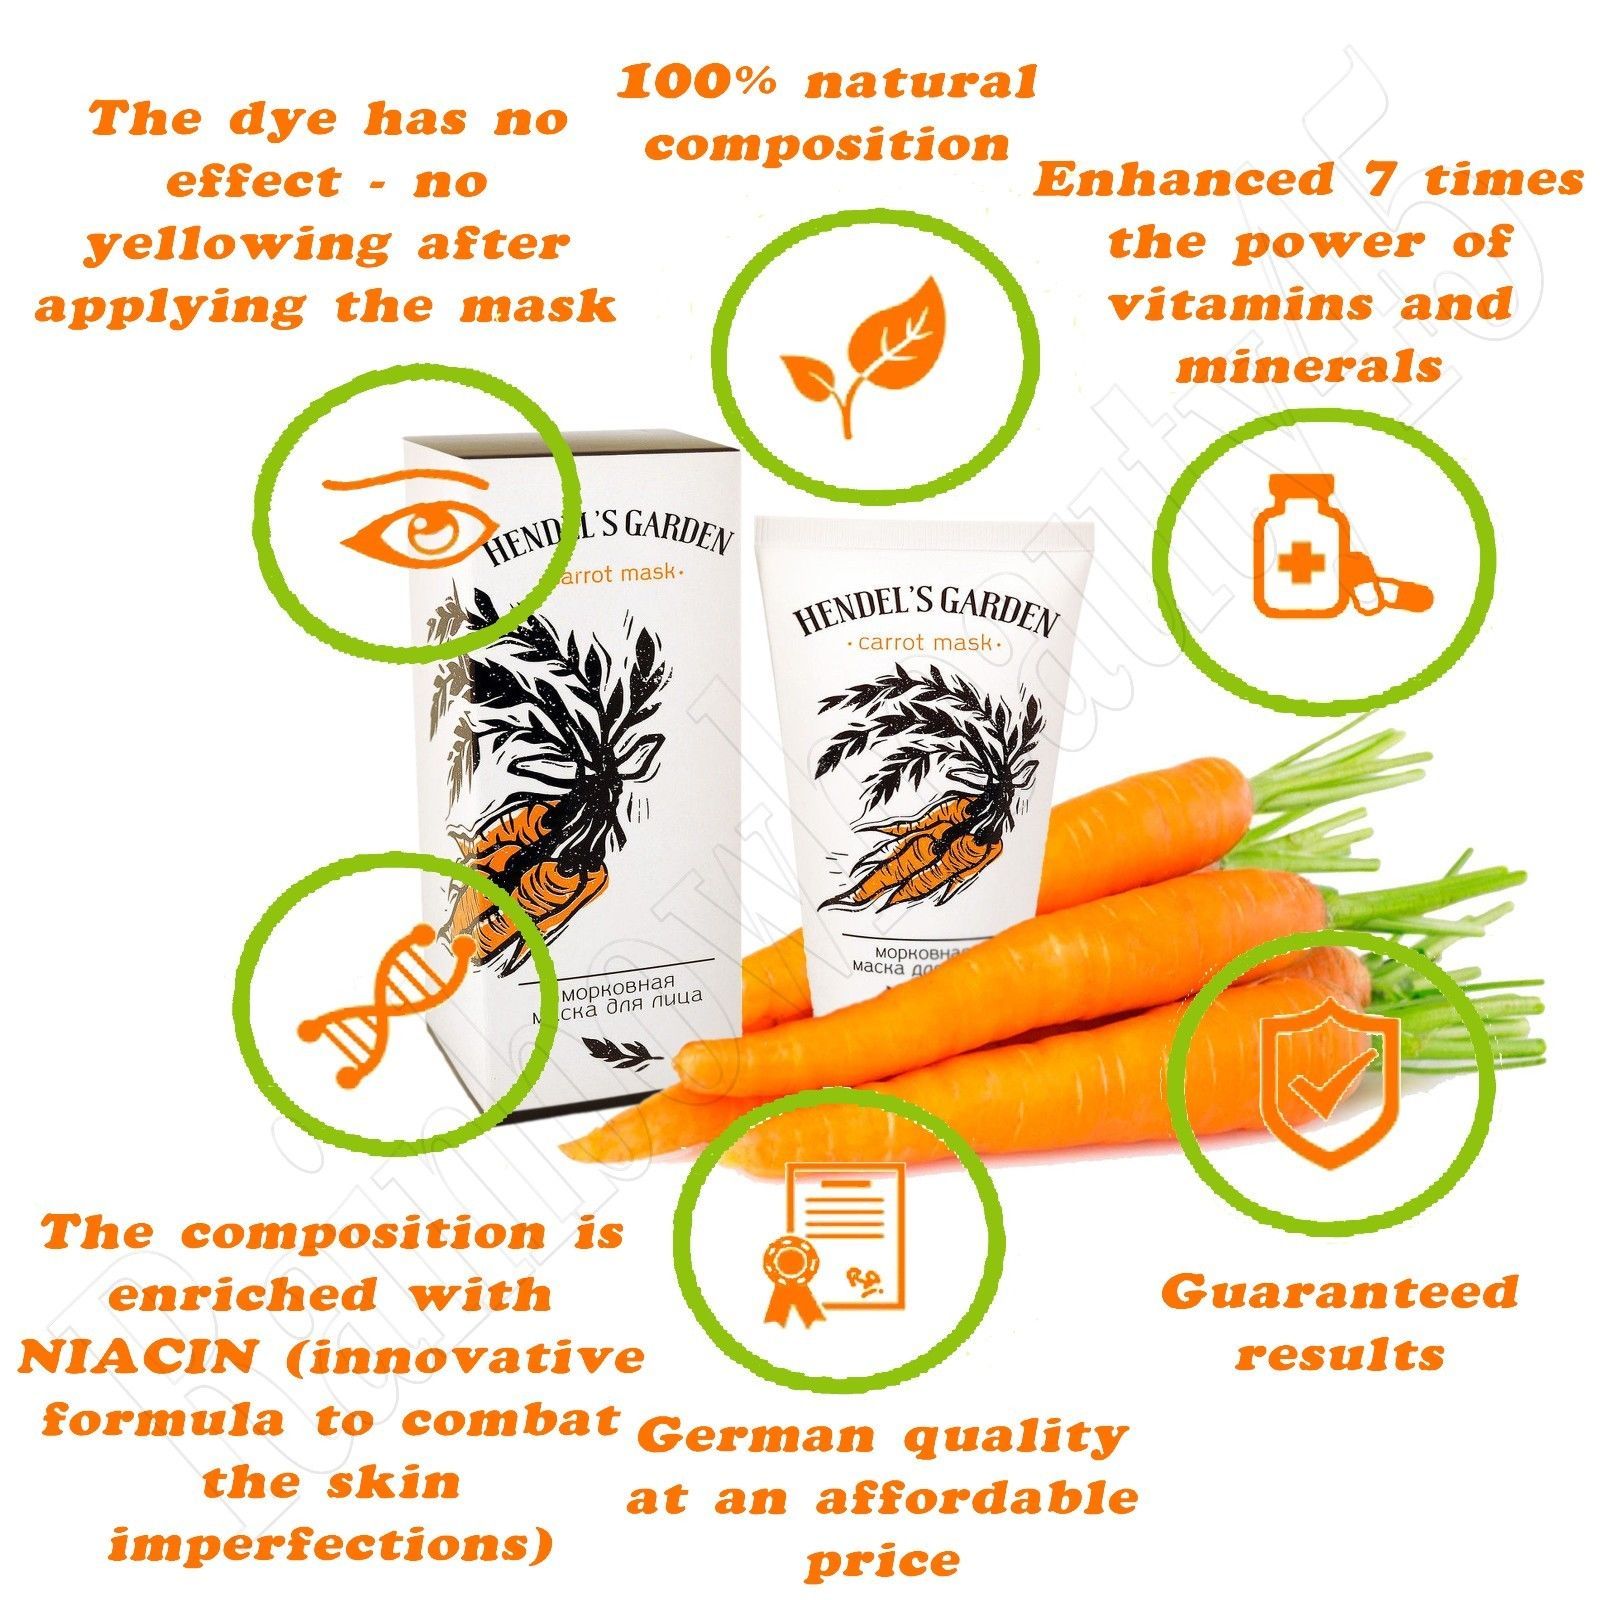 Carrot mask benefits Carrot mask For Glowing Skin: The consumption ...